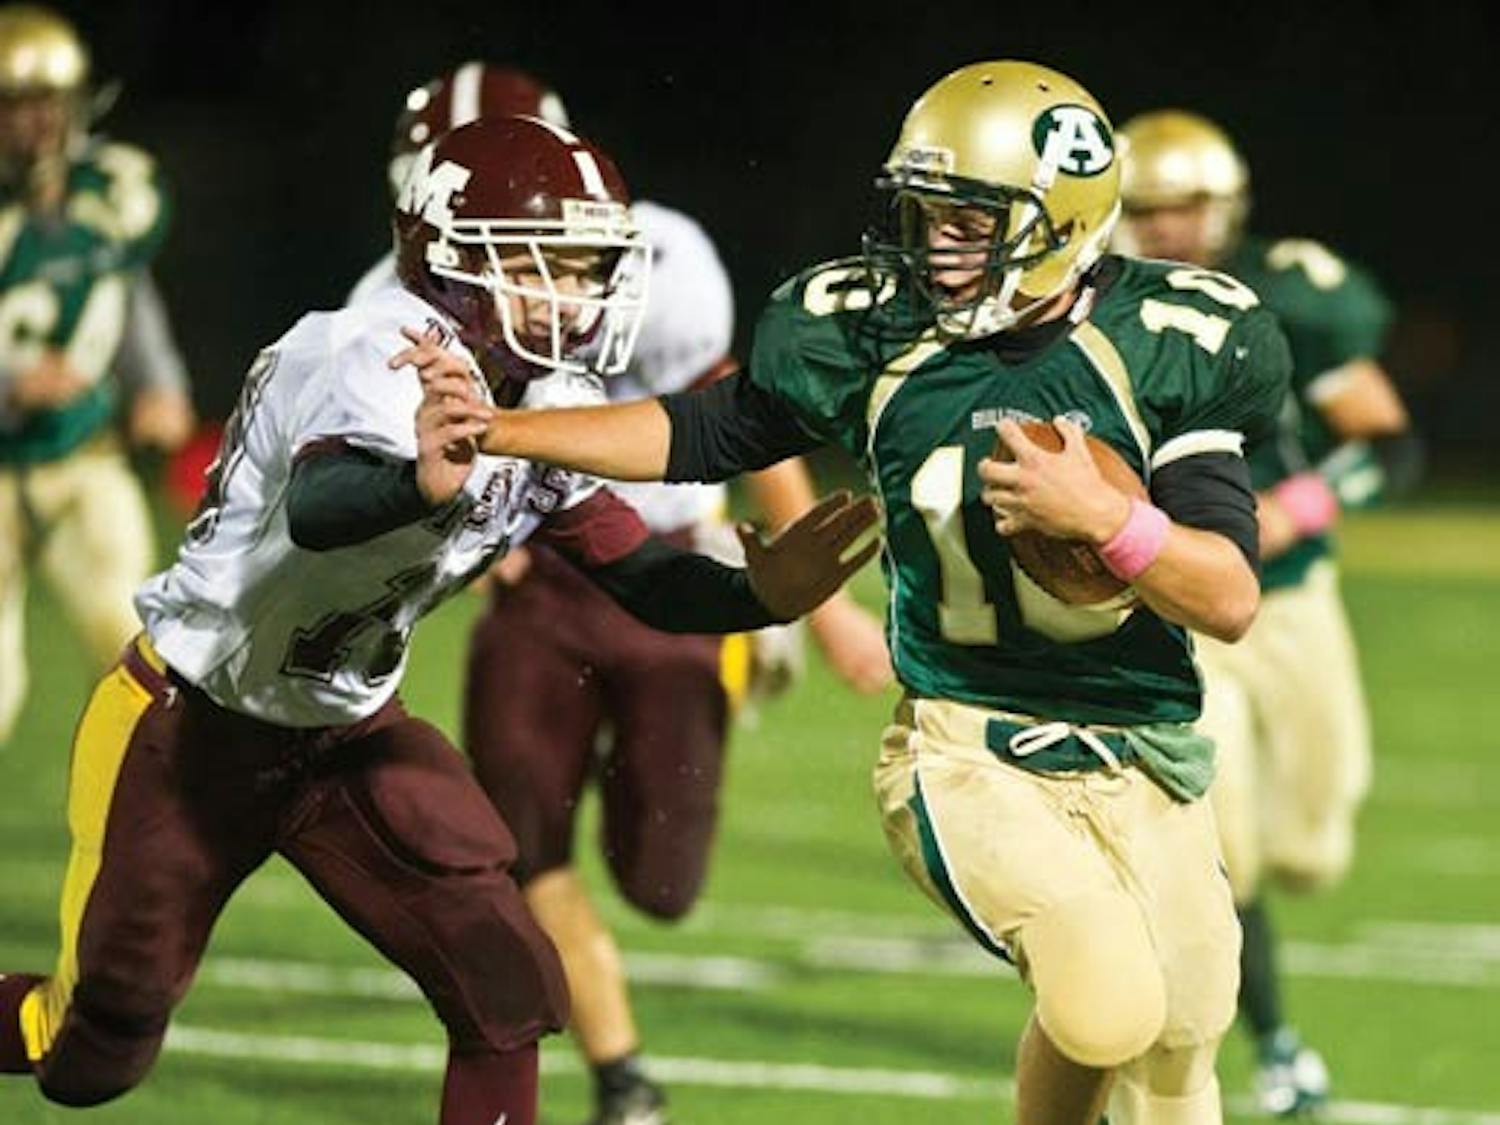 HS Football: Athens-area teams race to finish first  